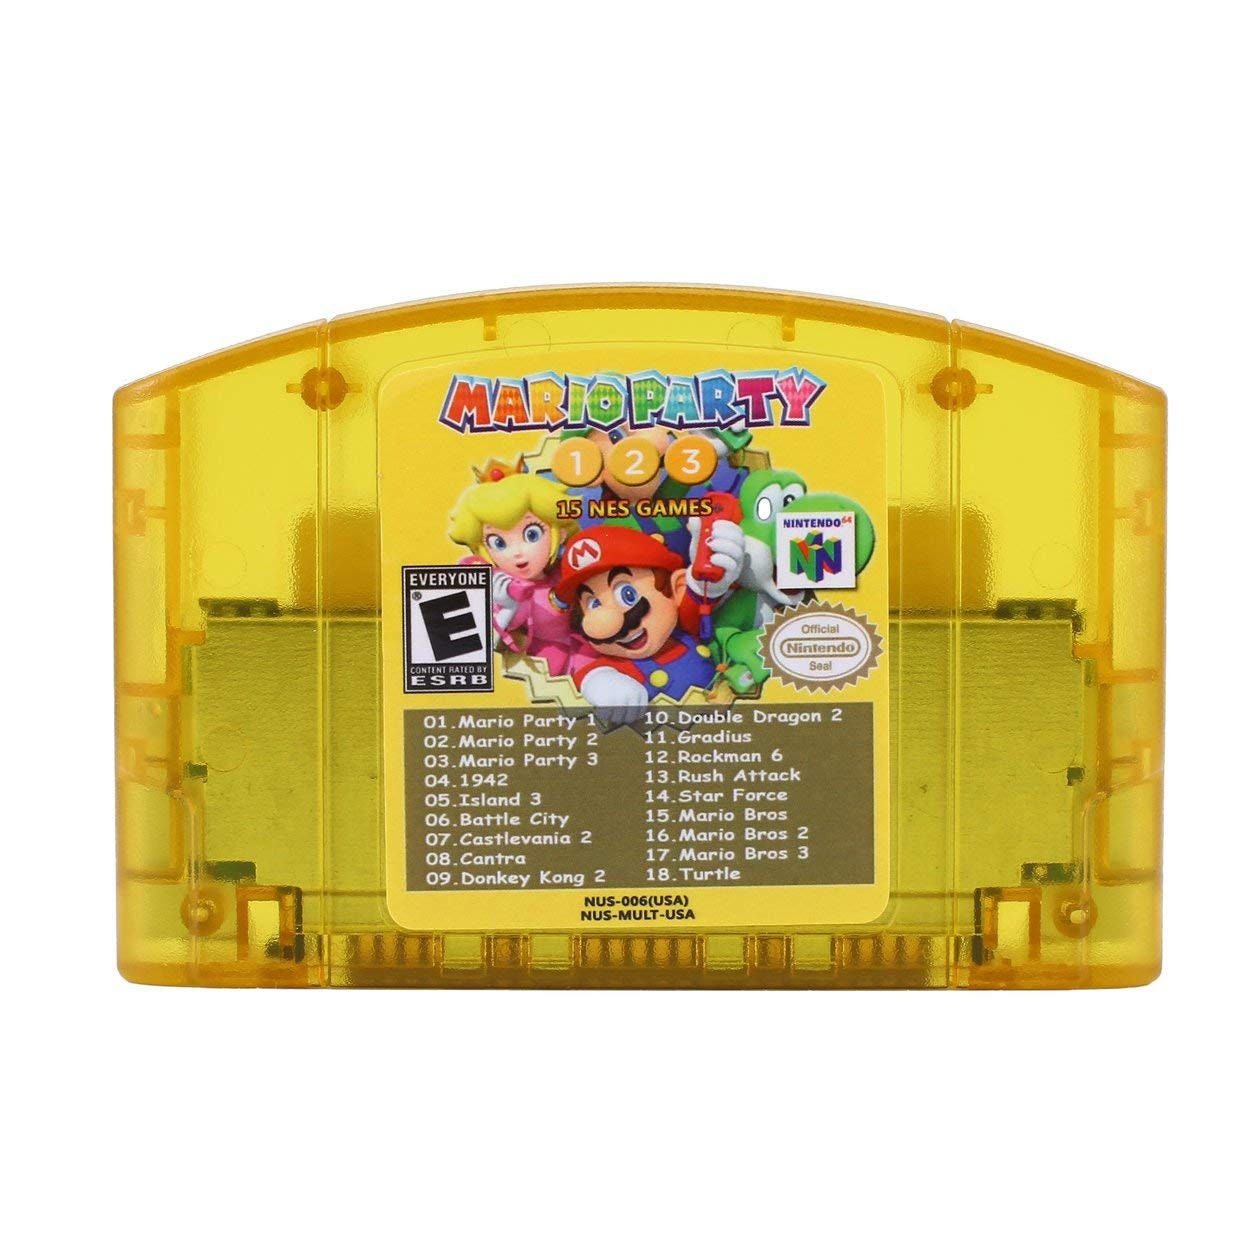 18 in 1 Game Card for Nintend N64 Mario Party 1 3 15 - Etsy